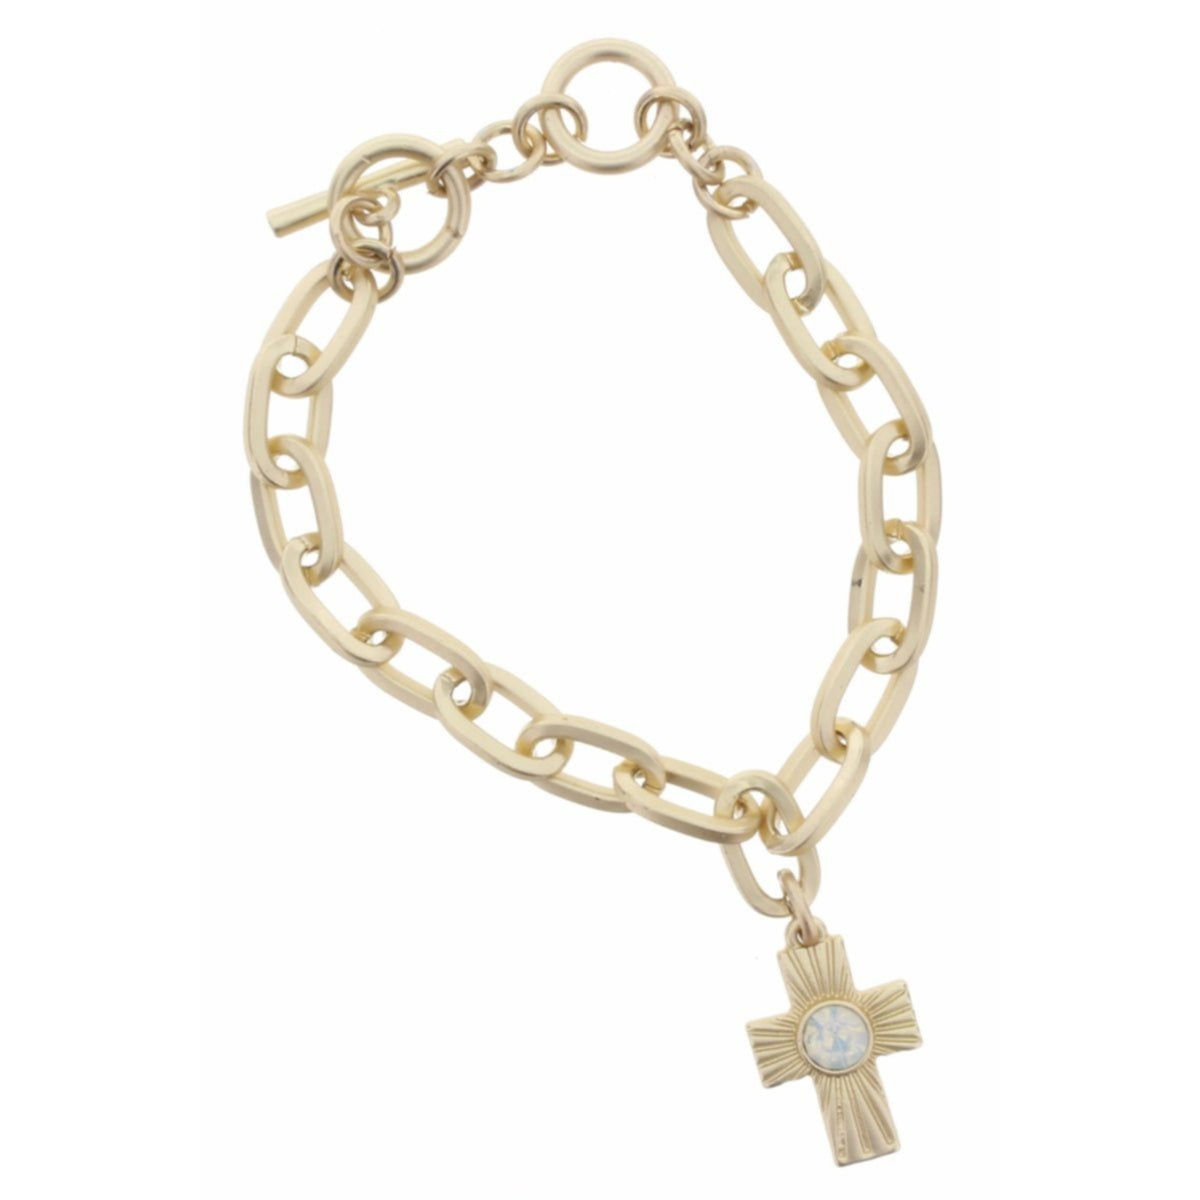 Gold Toggle Chain with Textured Cross with Opal Czech Center Stone Bracelet